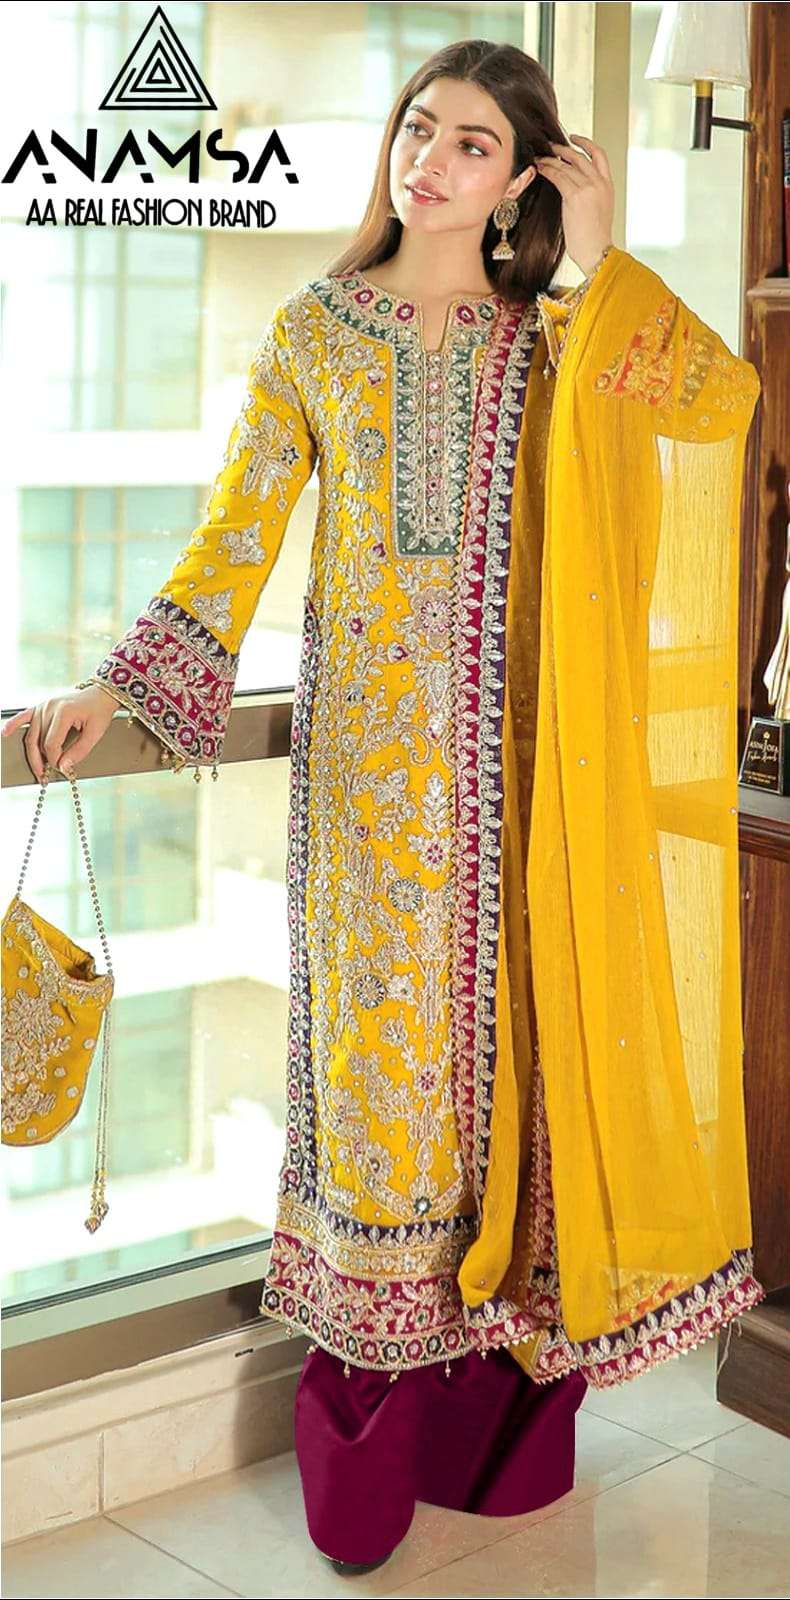 anamsa 7773 semi stitched anamsa 299 details heavy pure fox georgette with heavy embroidered very beautiful design and sequence work high quality material very beautiful semi stitched outfit